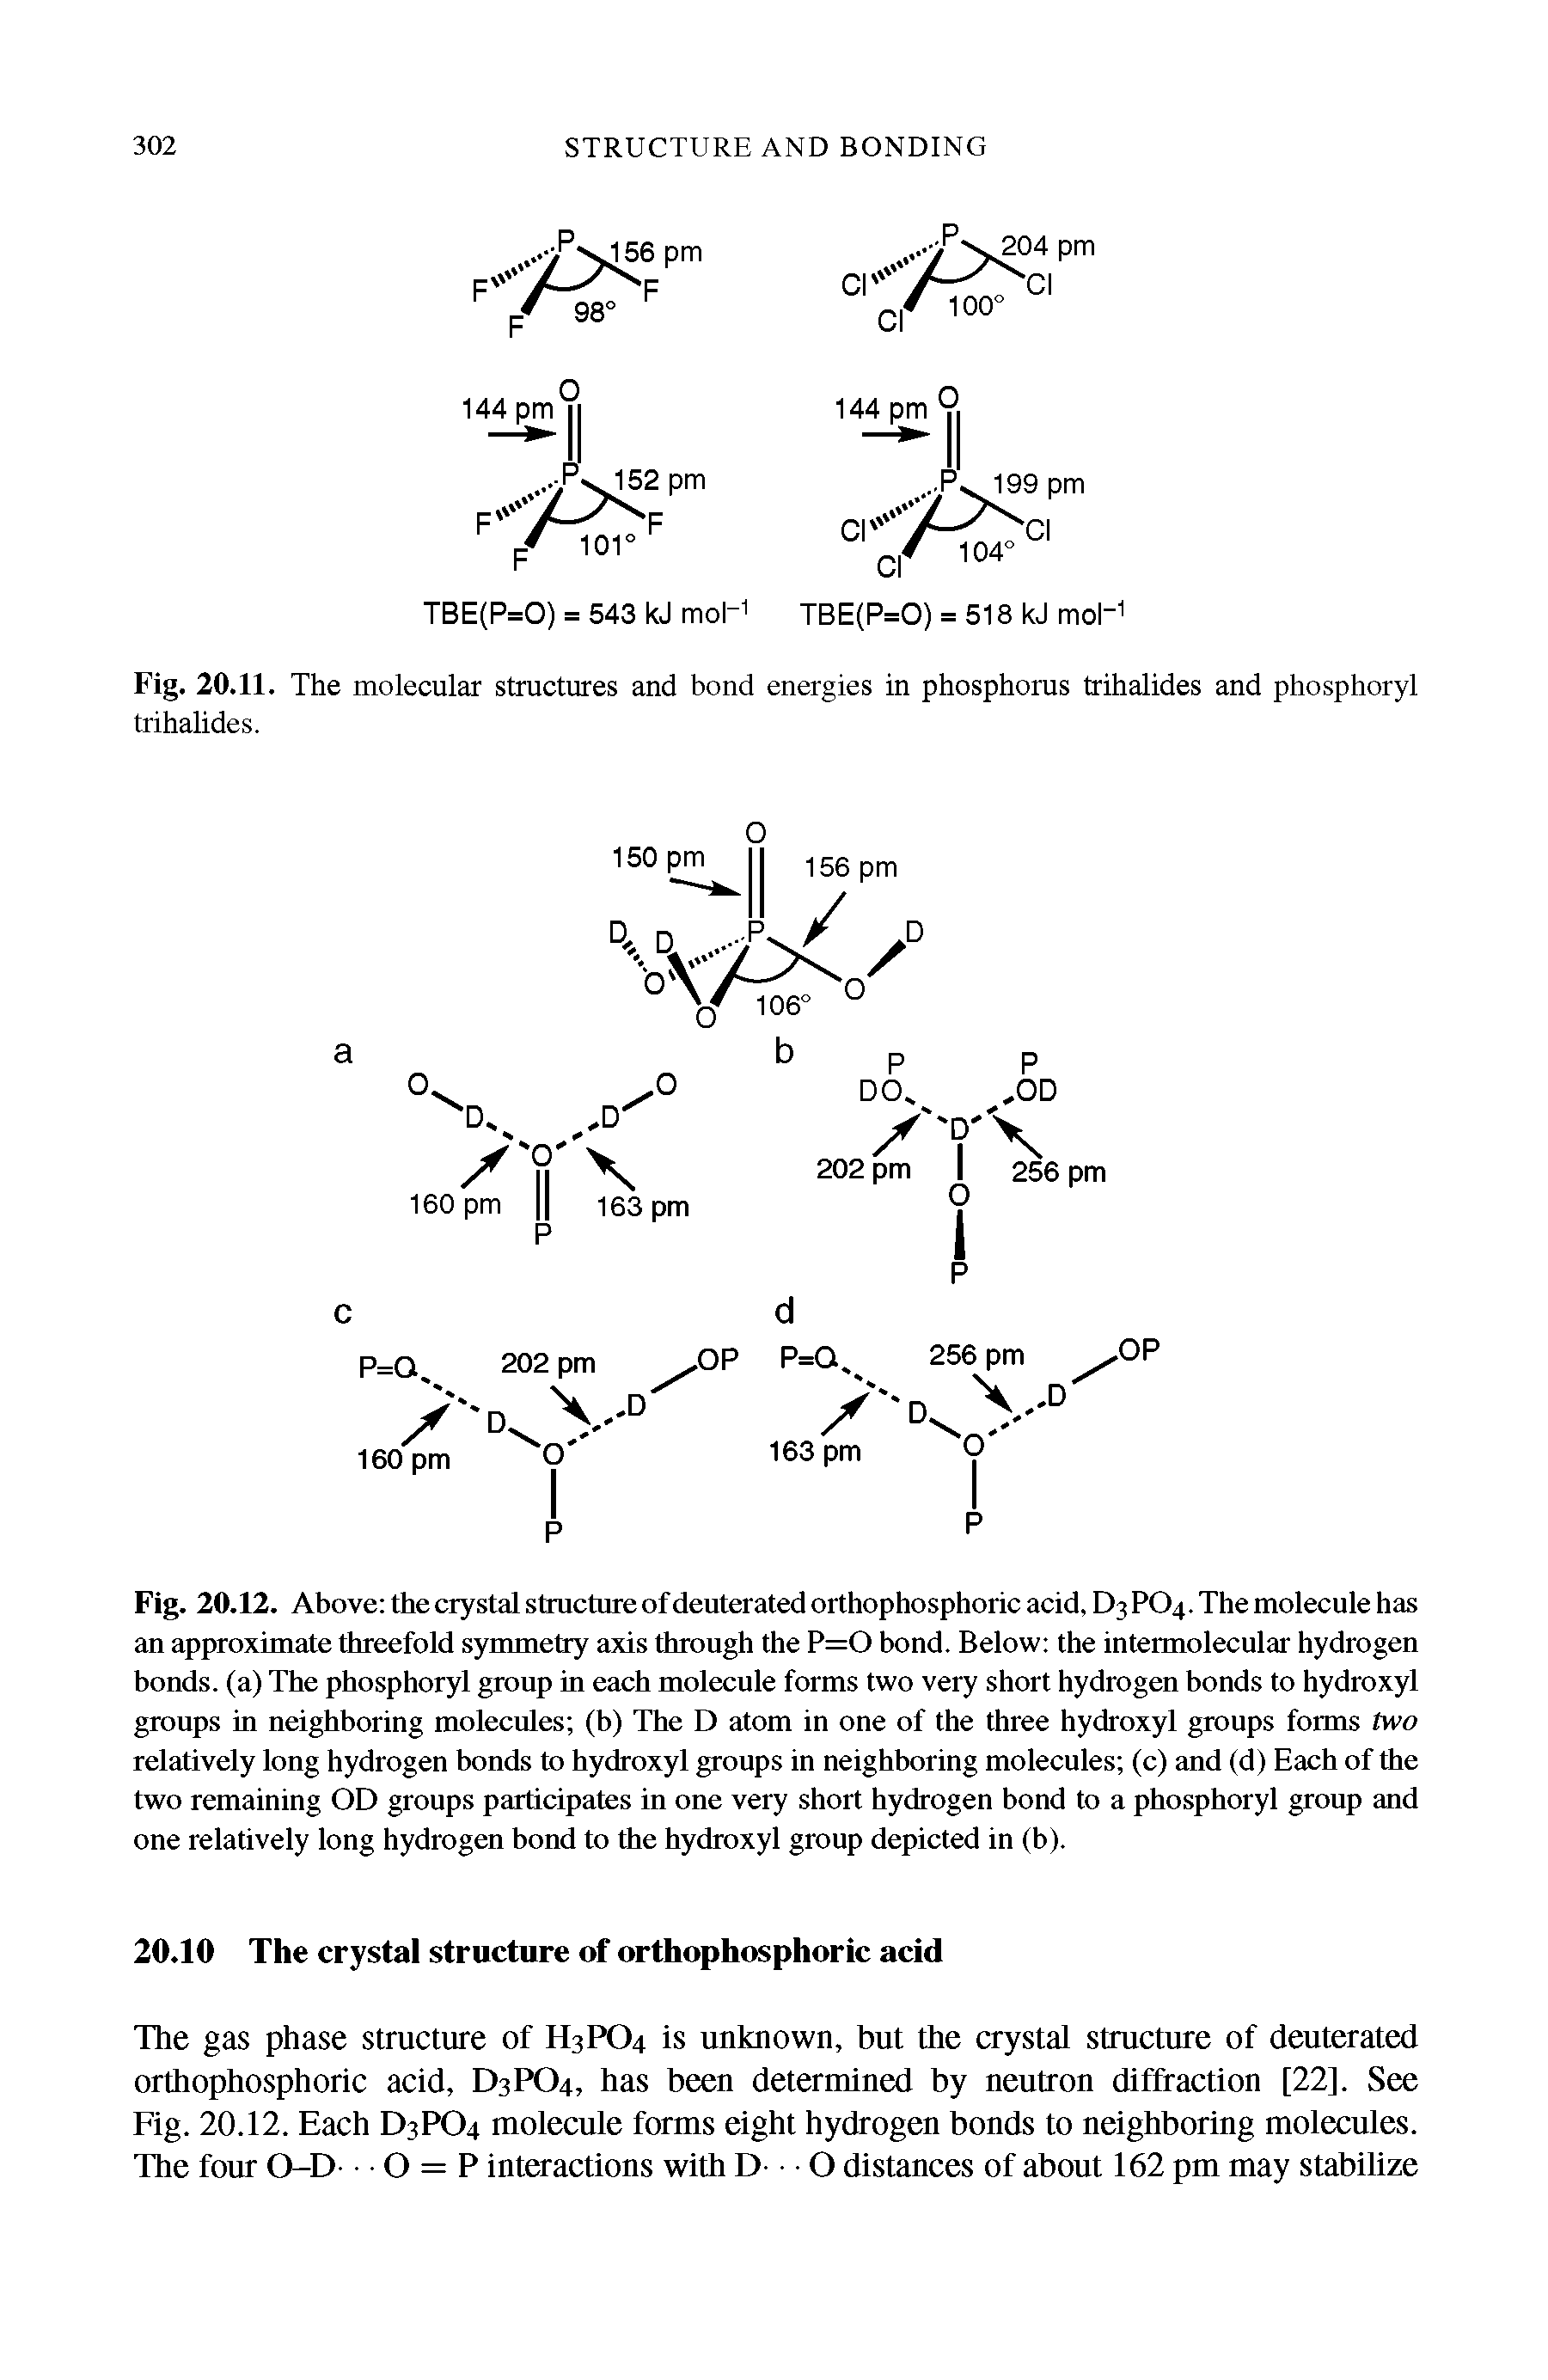 Fig. 20.11. The molecular structures and bond energies in phosphorus trihalides and phosphoryl trihalides.